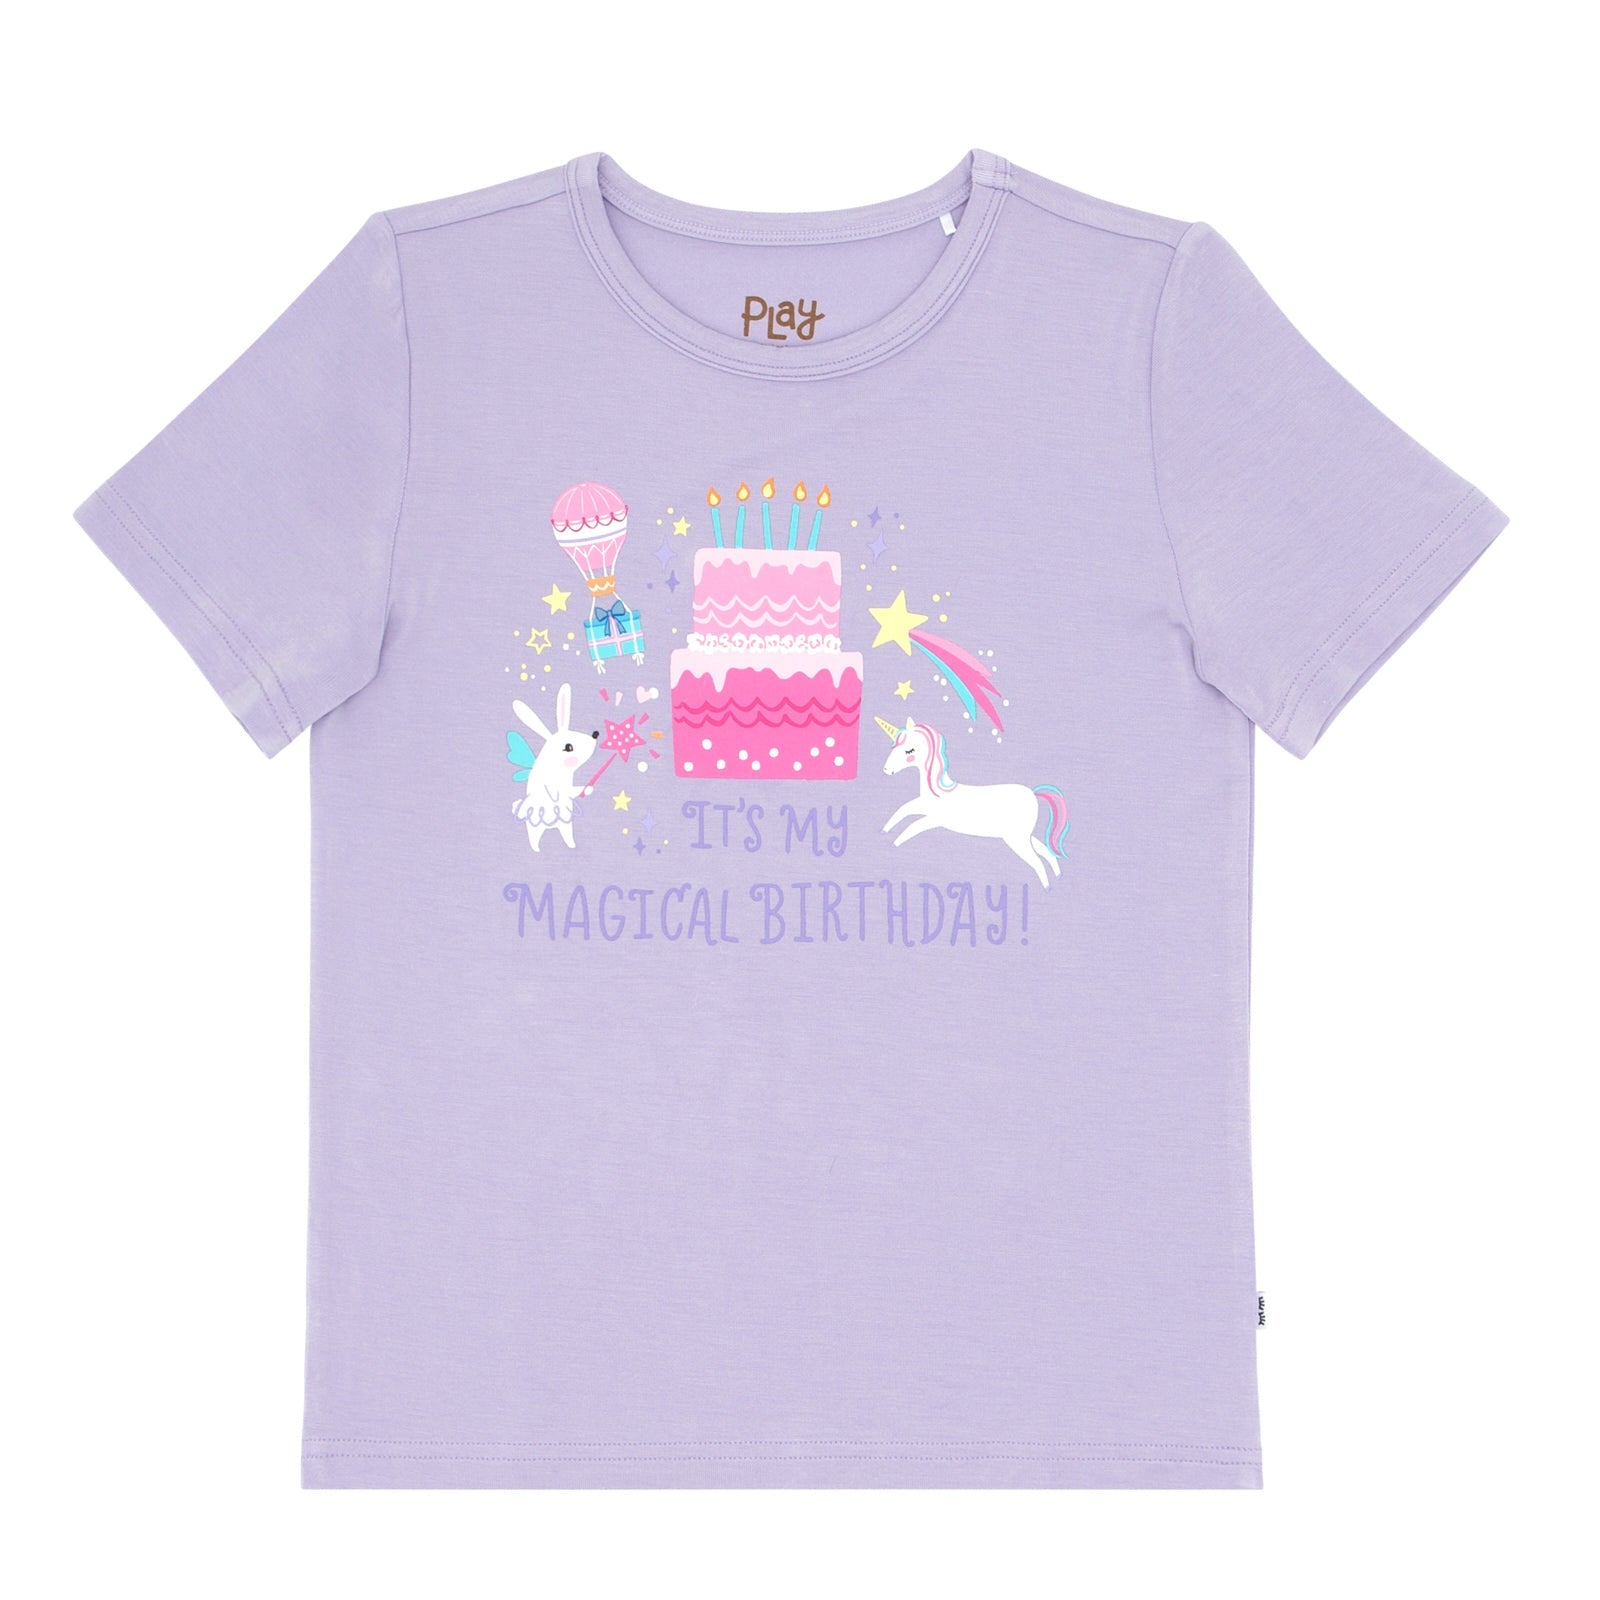 Flat lay image of a Magical Birthday Light Lavender graphic tee